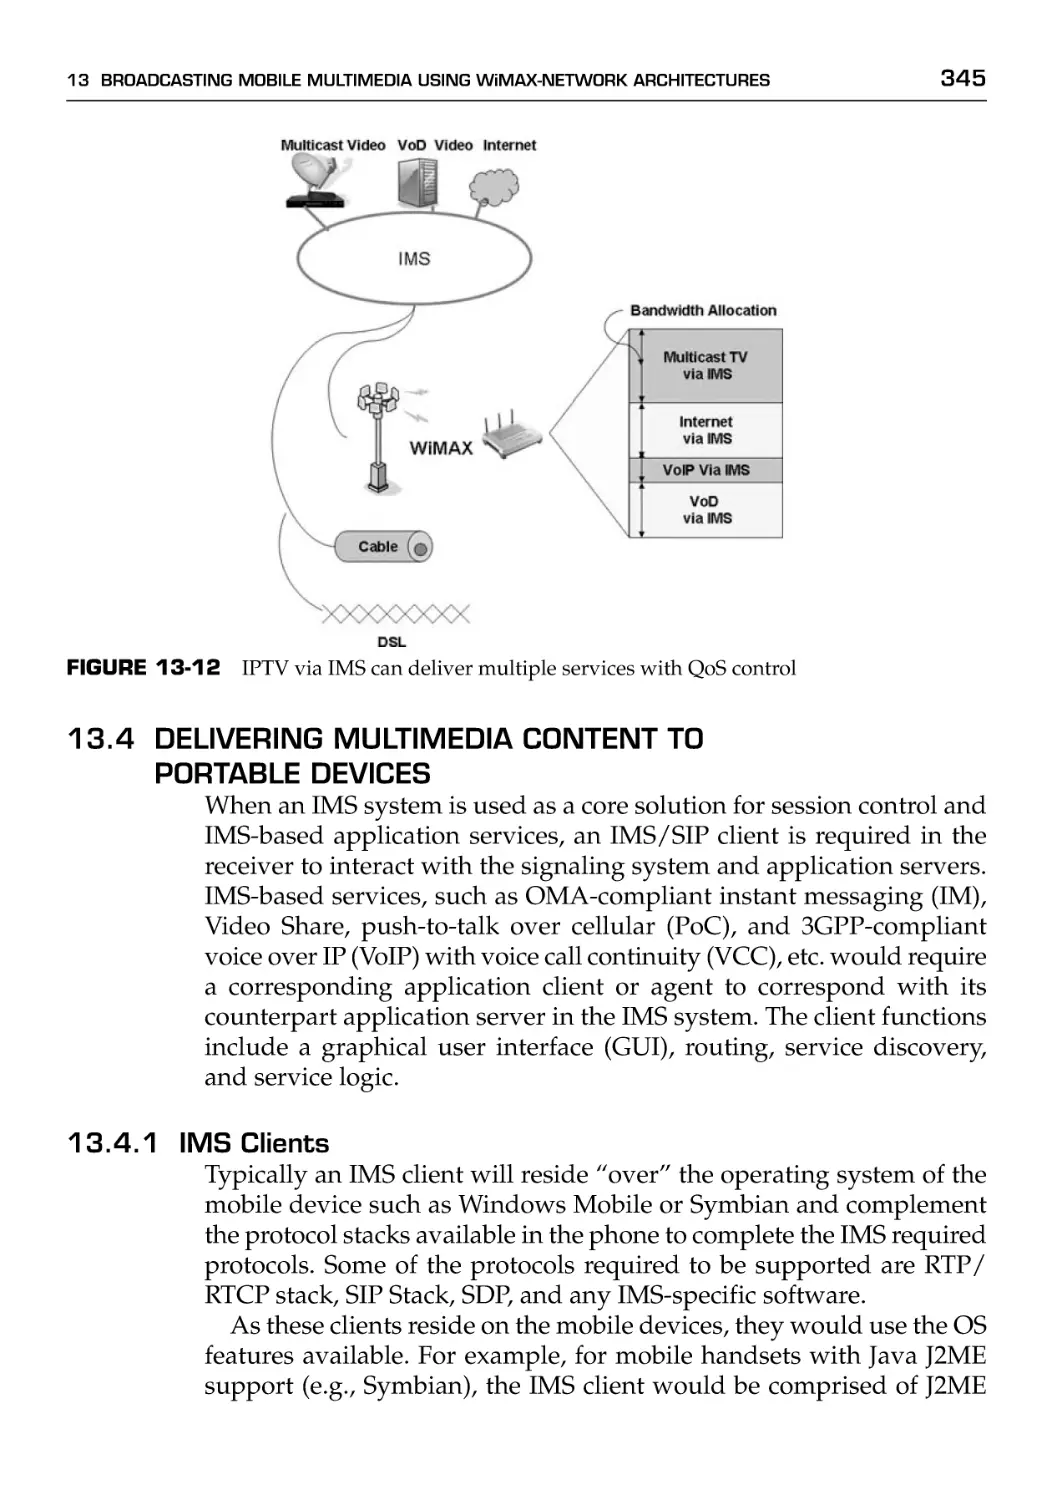 13.4 Delivering Multimedia Content to Portable Devices